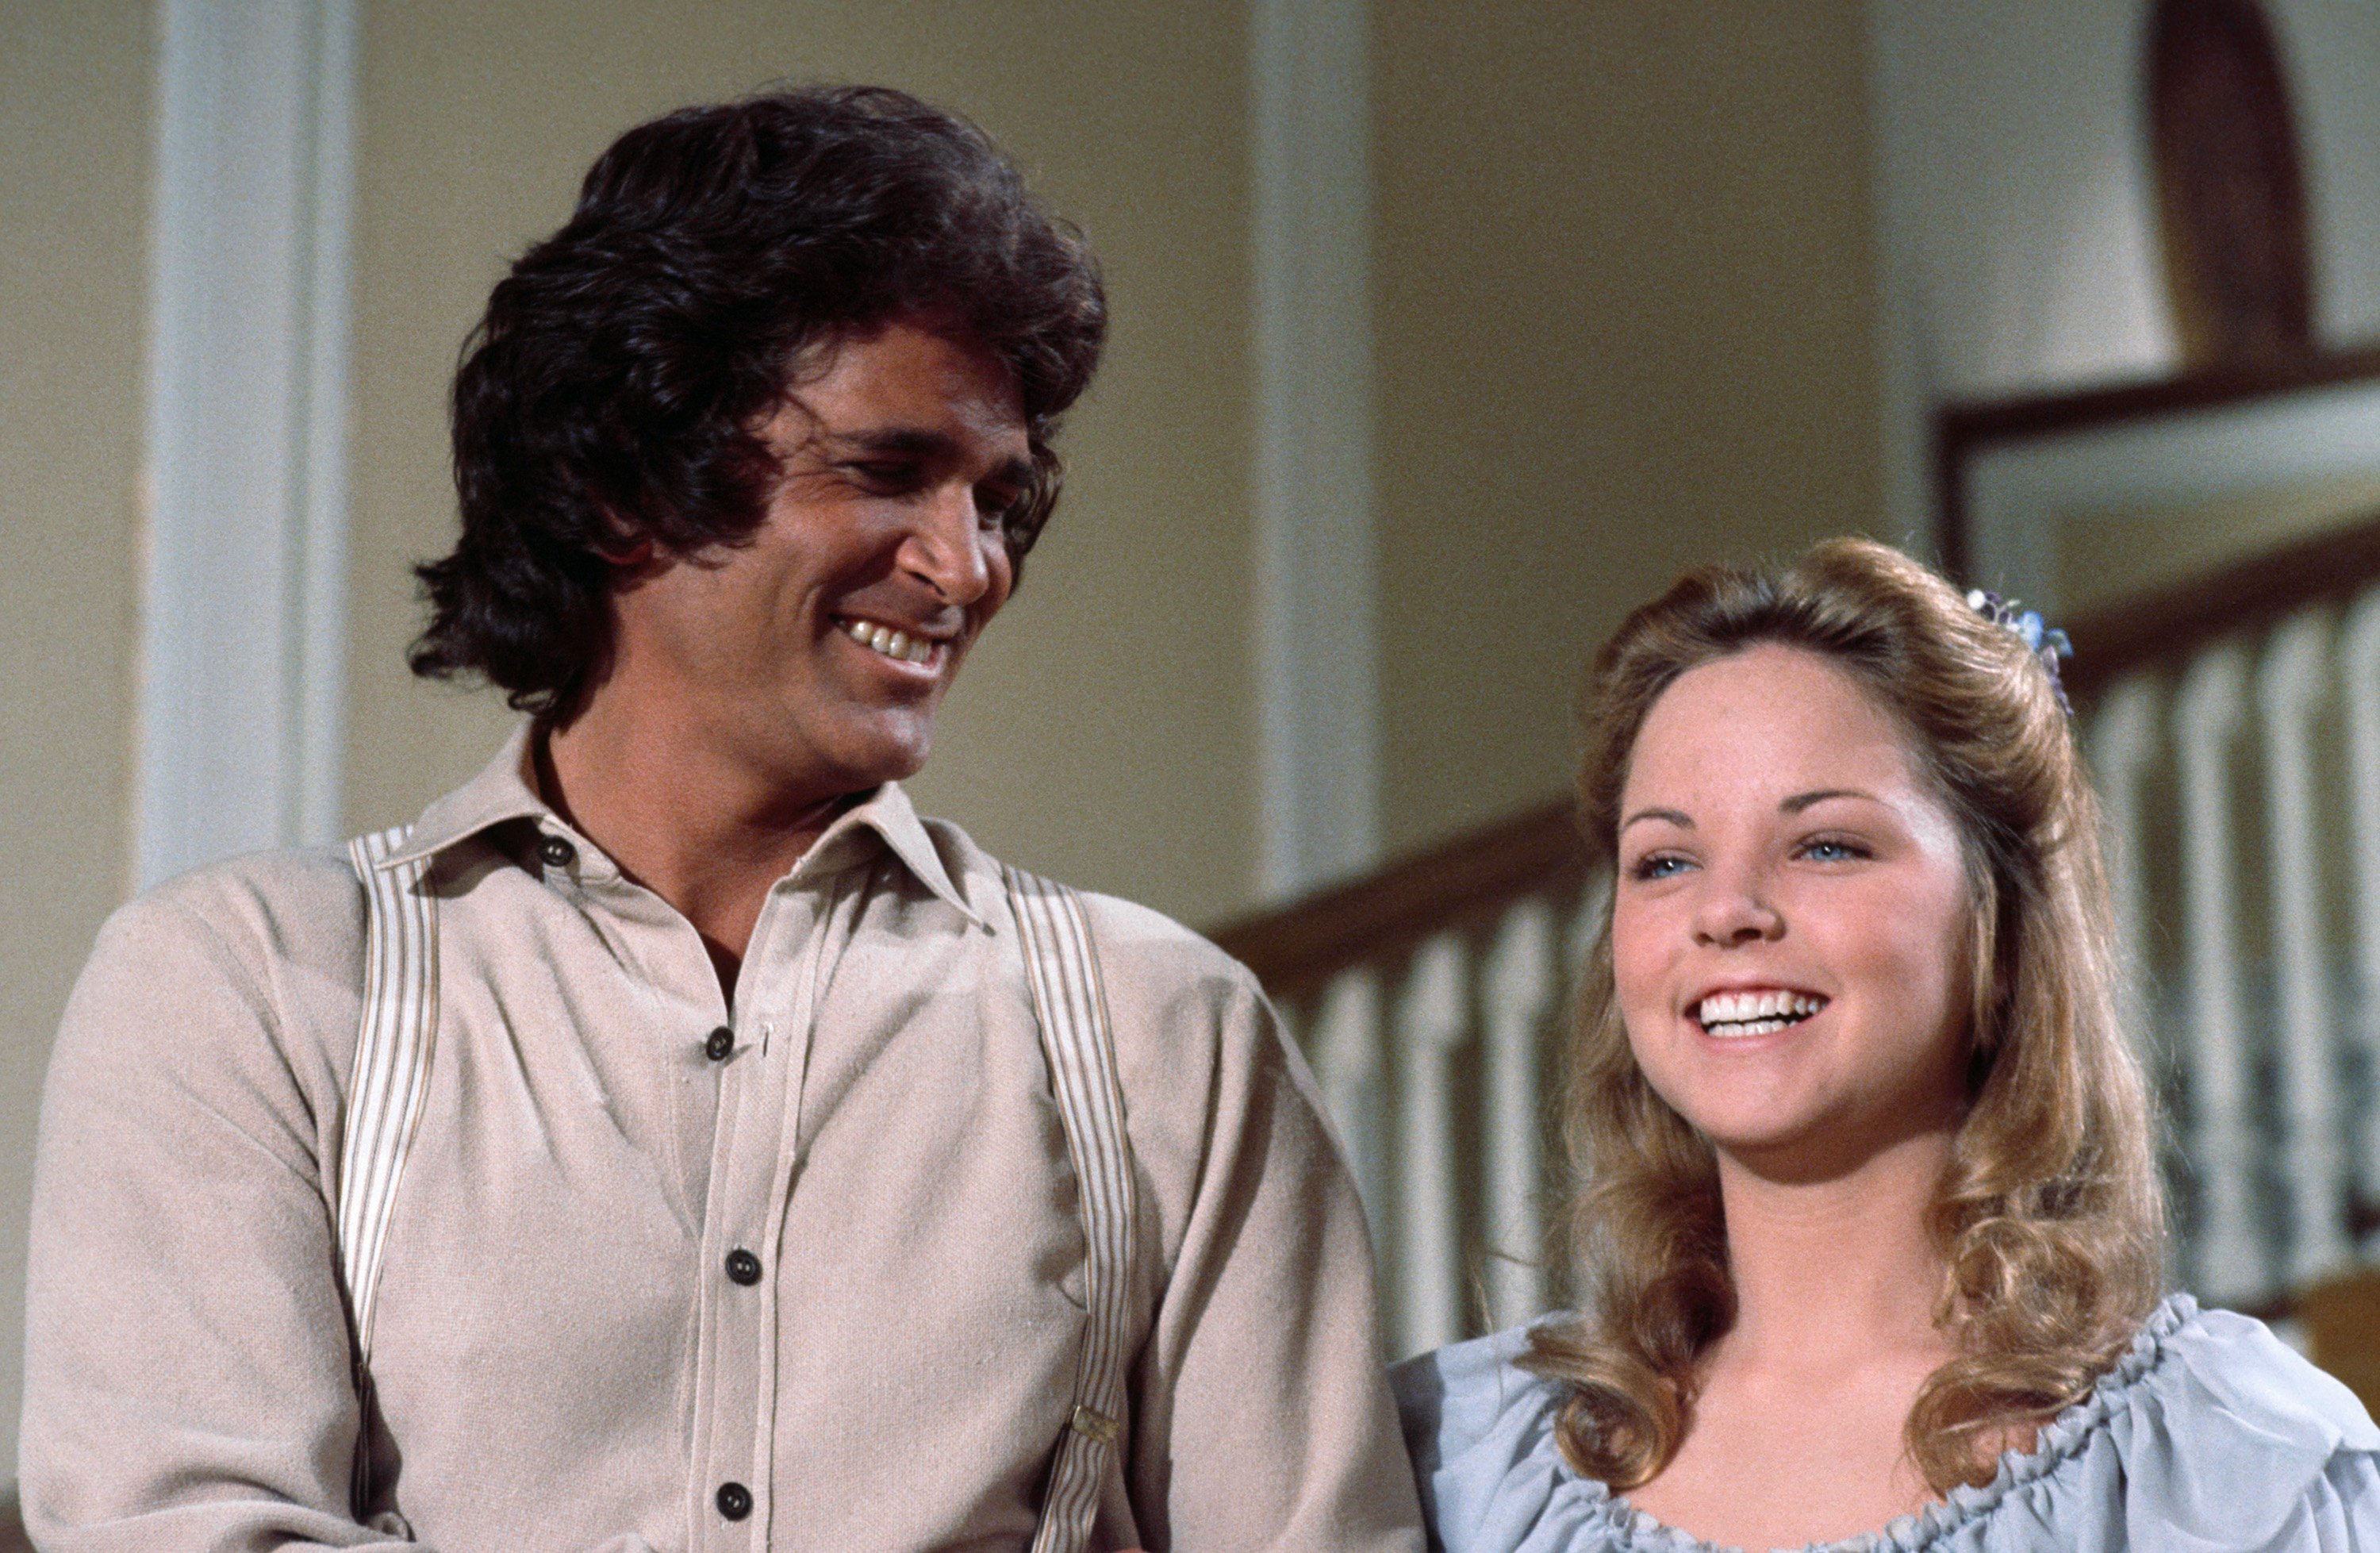 Melissa Sue Anderson as Mary Ingalls, Michael Landon as Charles Ingalls on "Little House on the Prairie," on September 19 1977. | Source: Getty Images